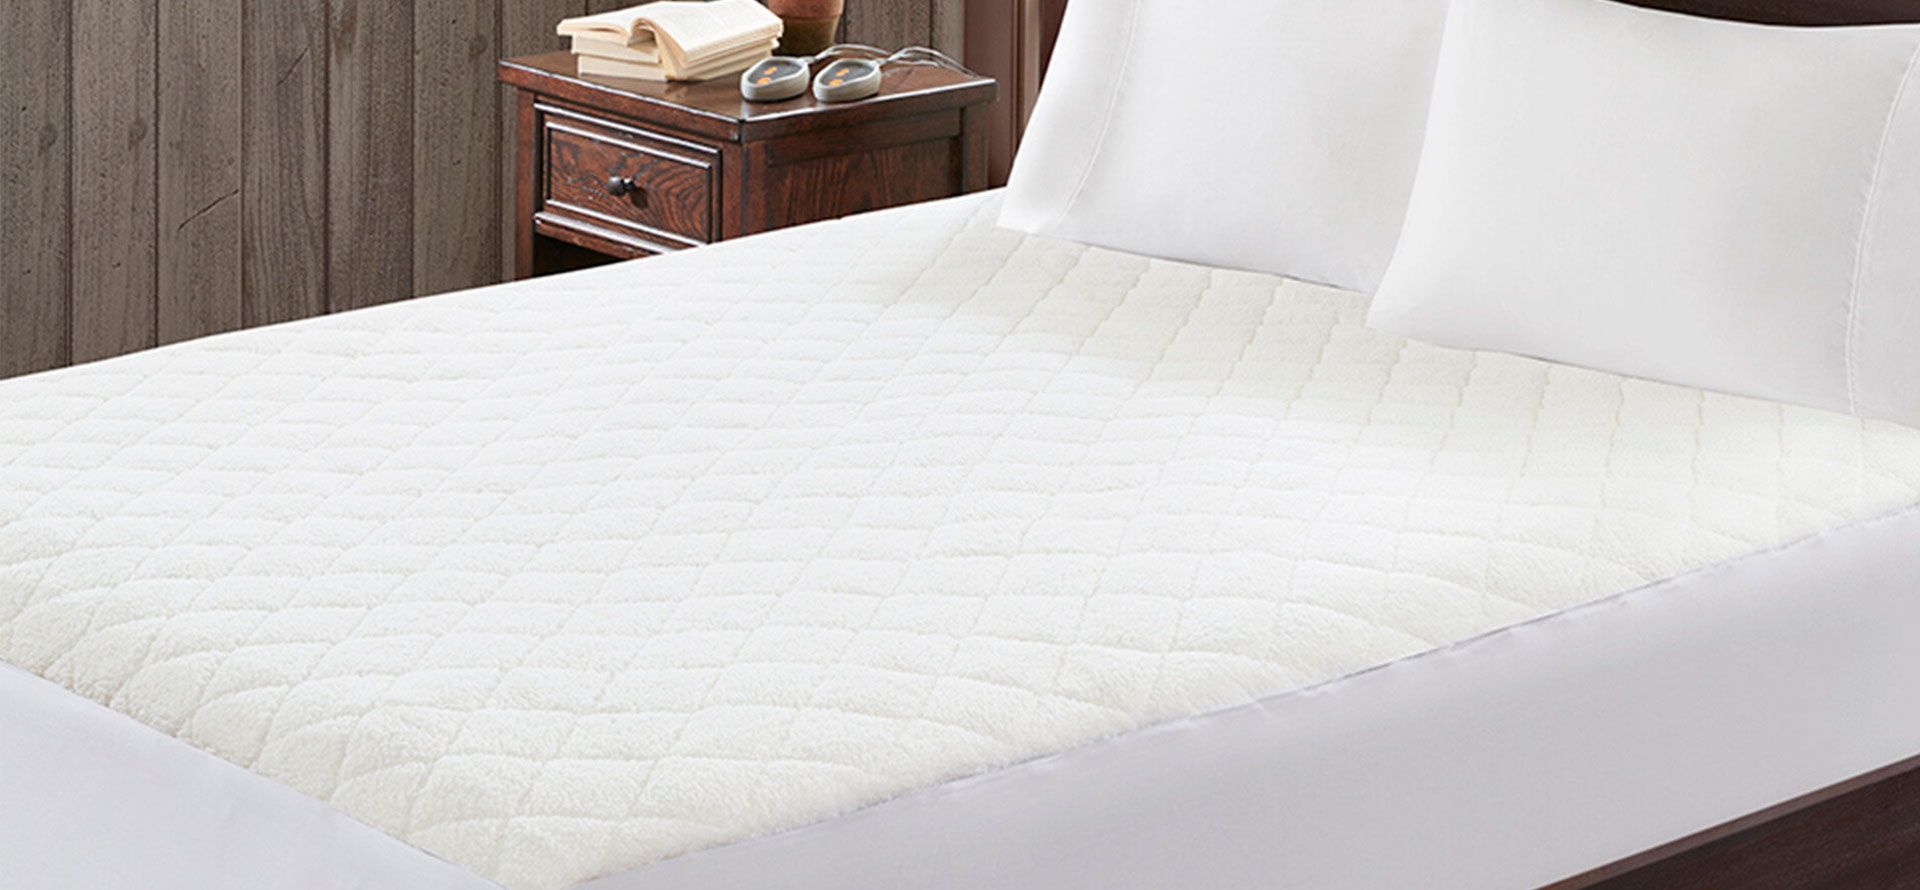 Heated mattress pad on the bed.